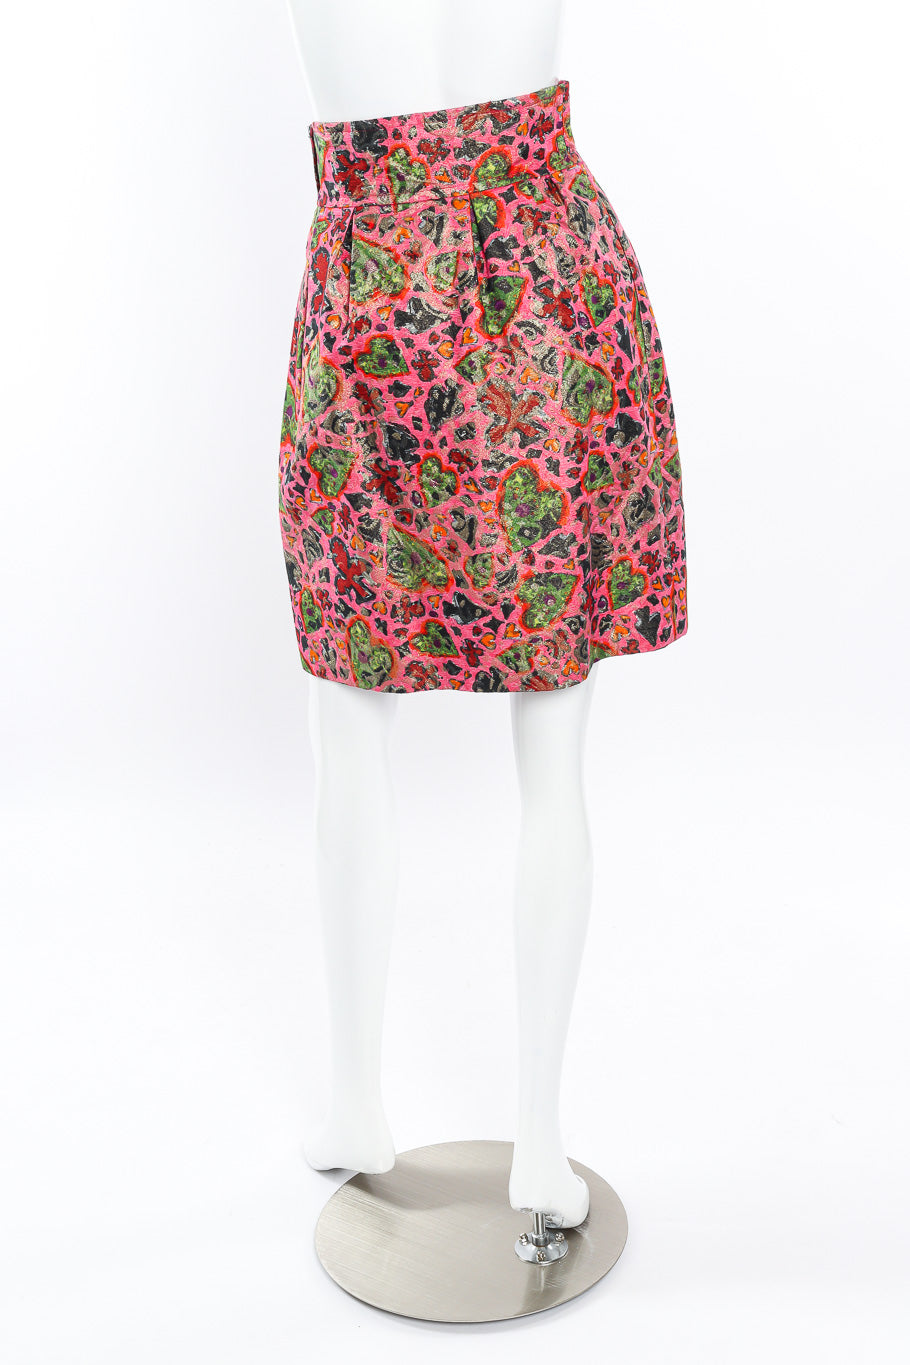 Vintage Christian Lacroix Abstract Print Skirt back view on mannequin @Recessla